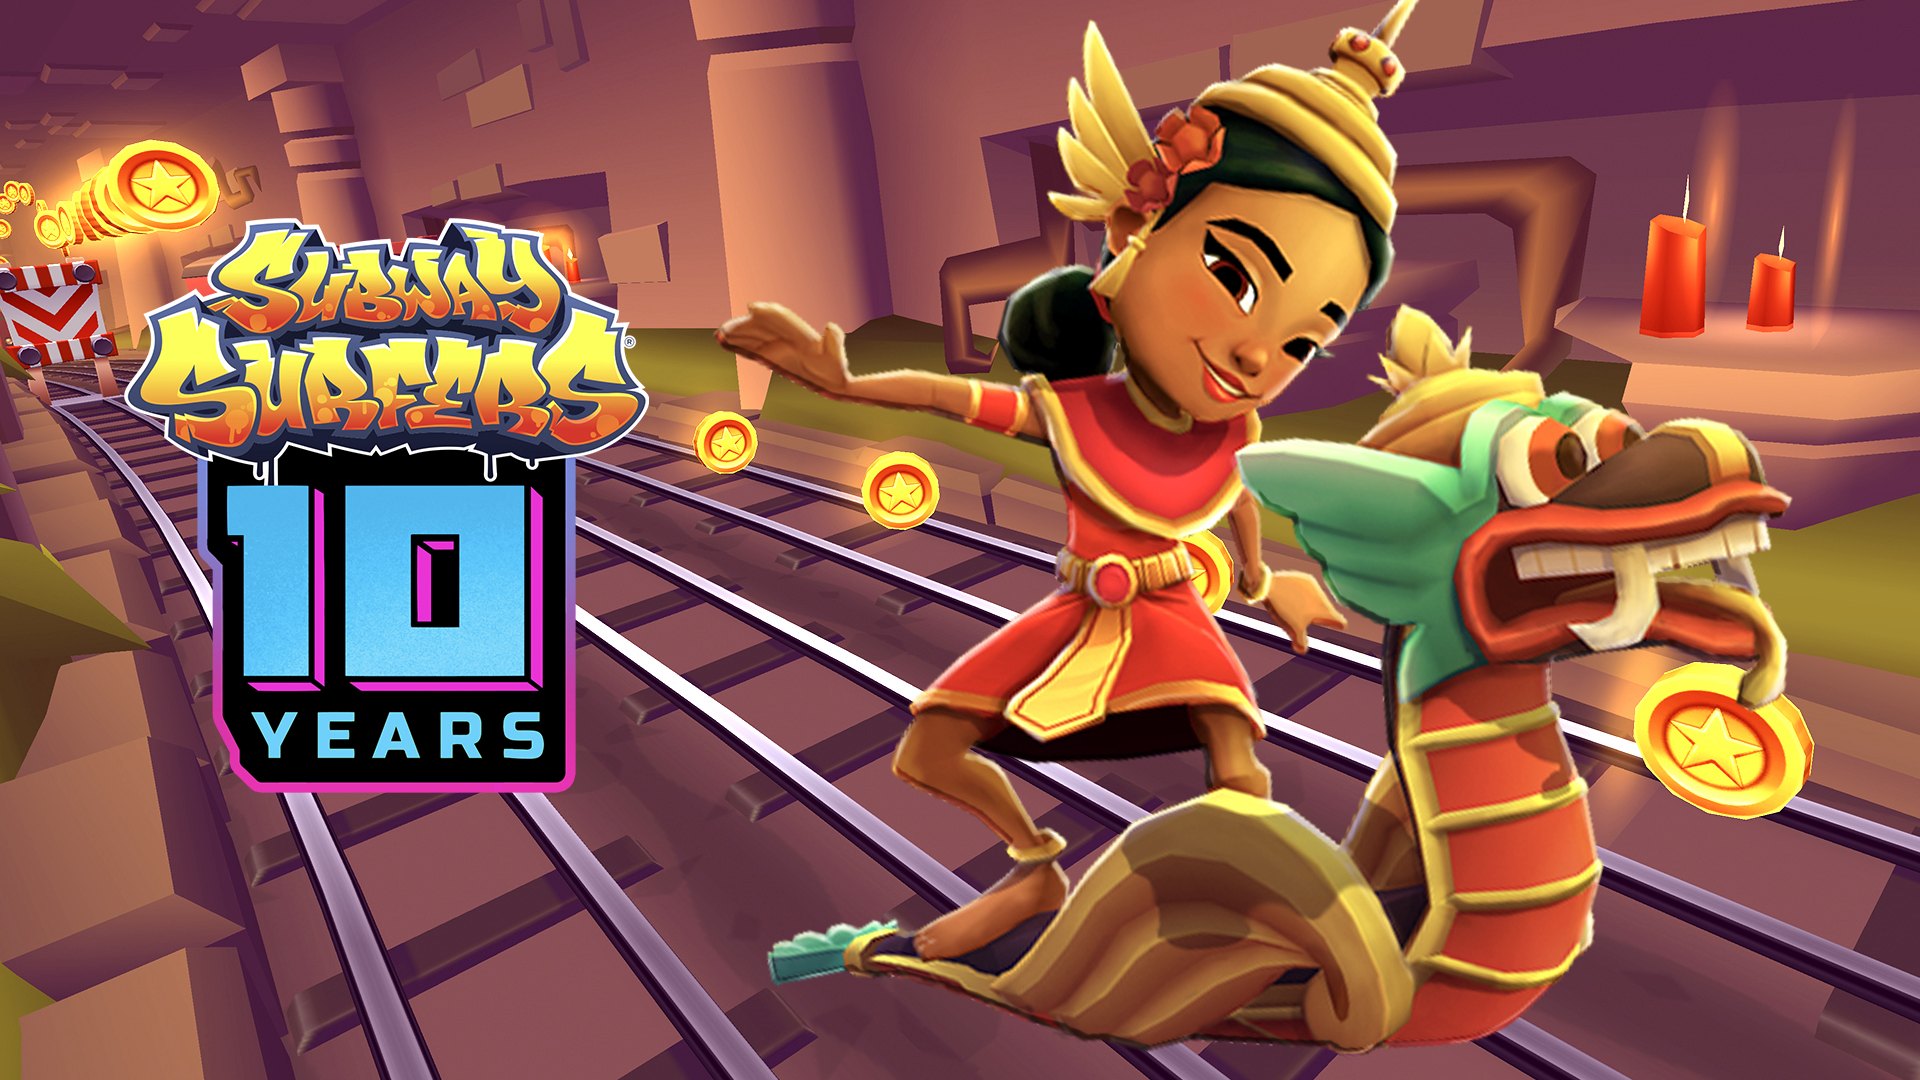 Subway Surfers: Lessons from the world's most downloaded game